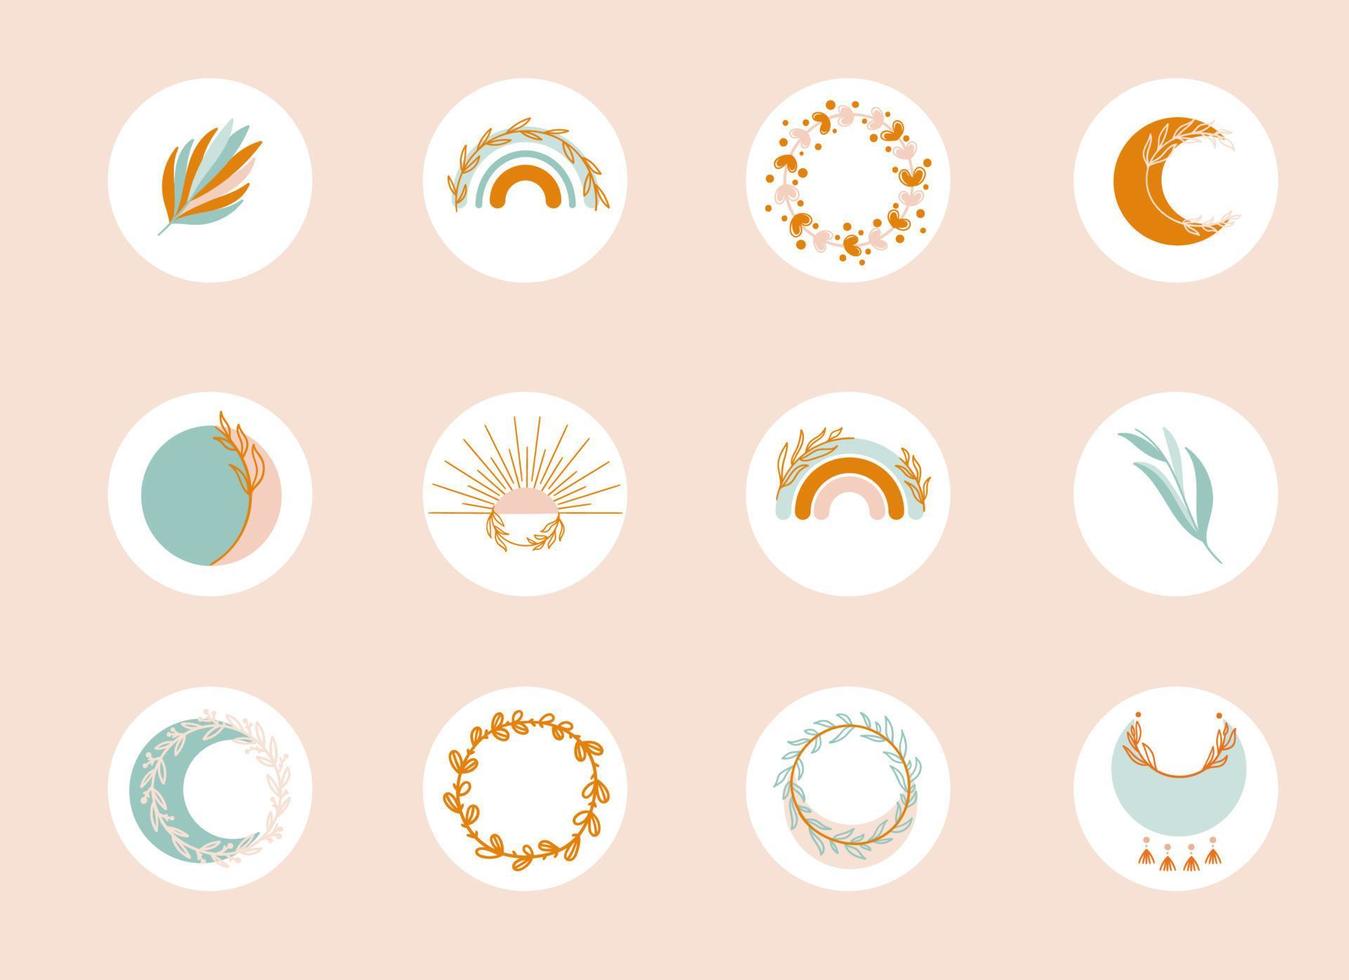 Highlights in social media icons. Vector illustrations for a story in boho style